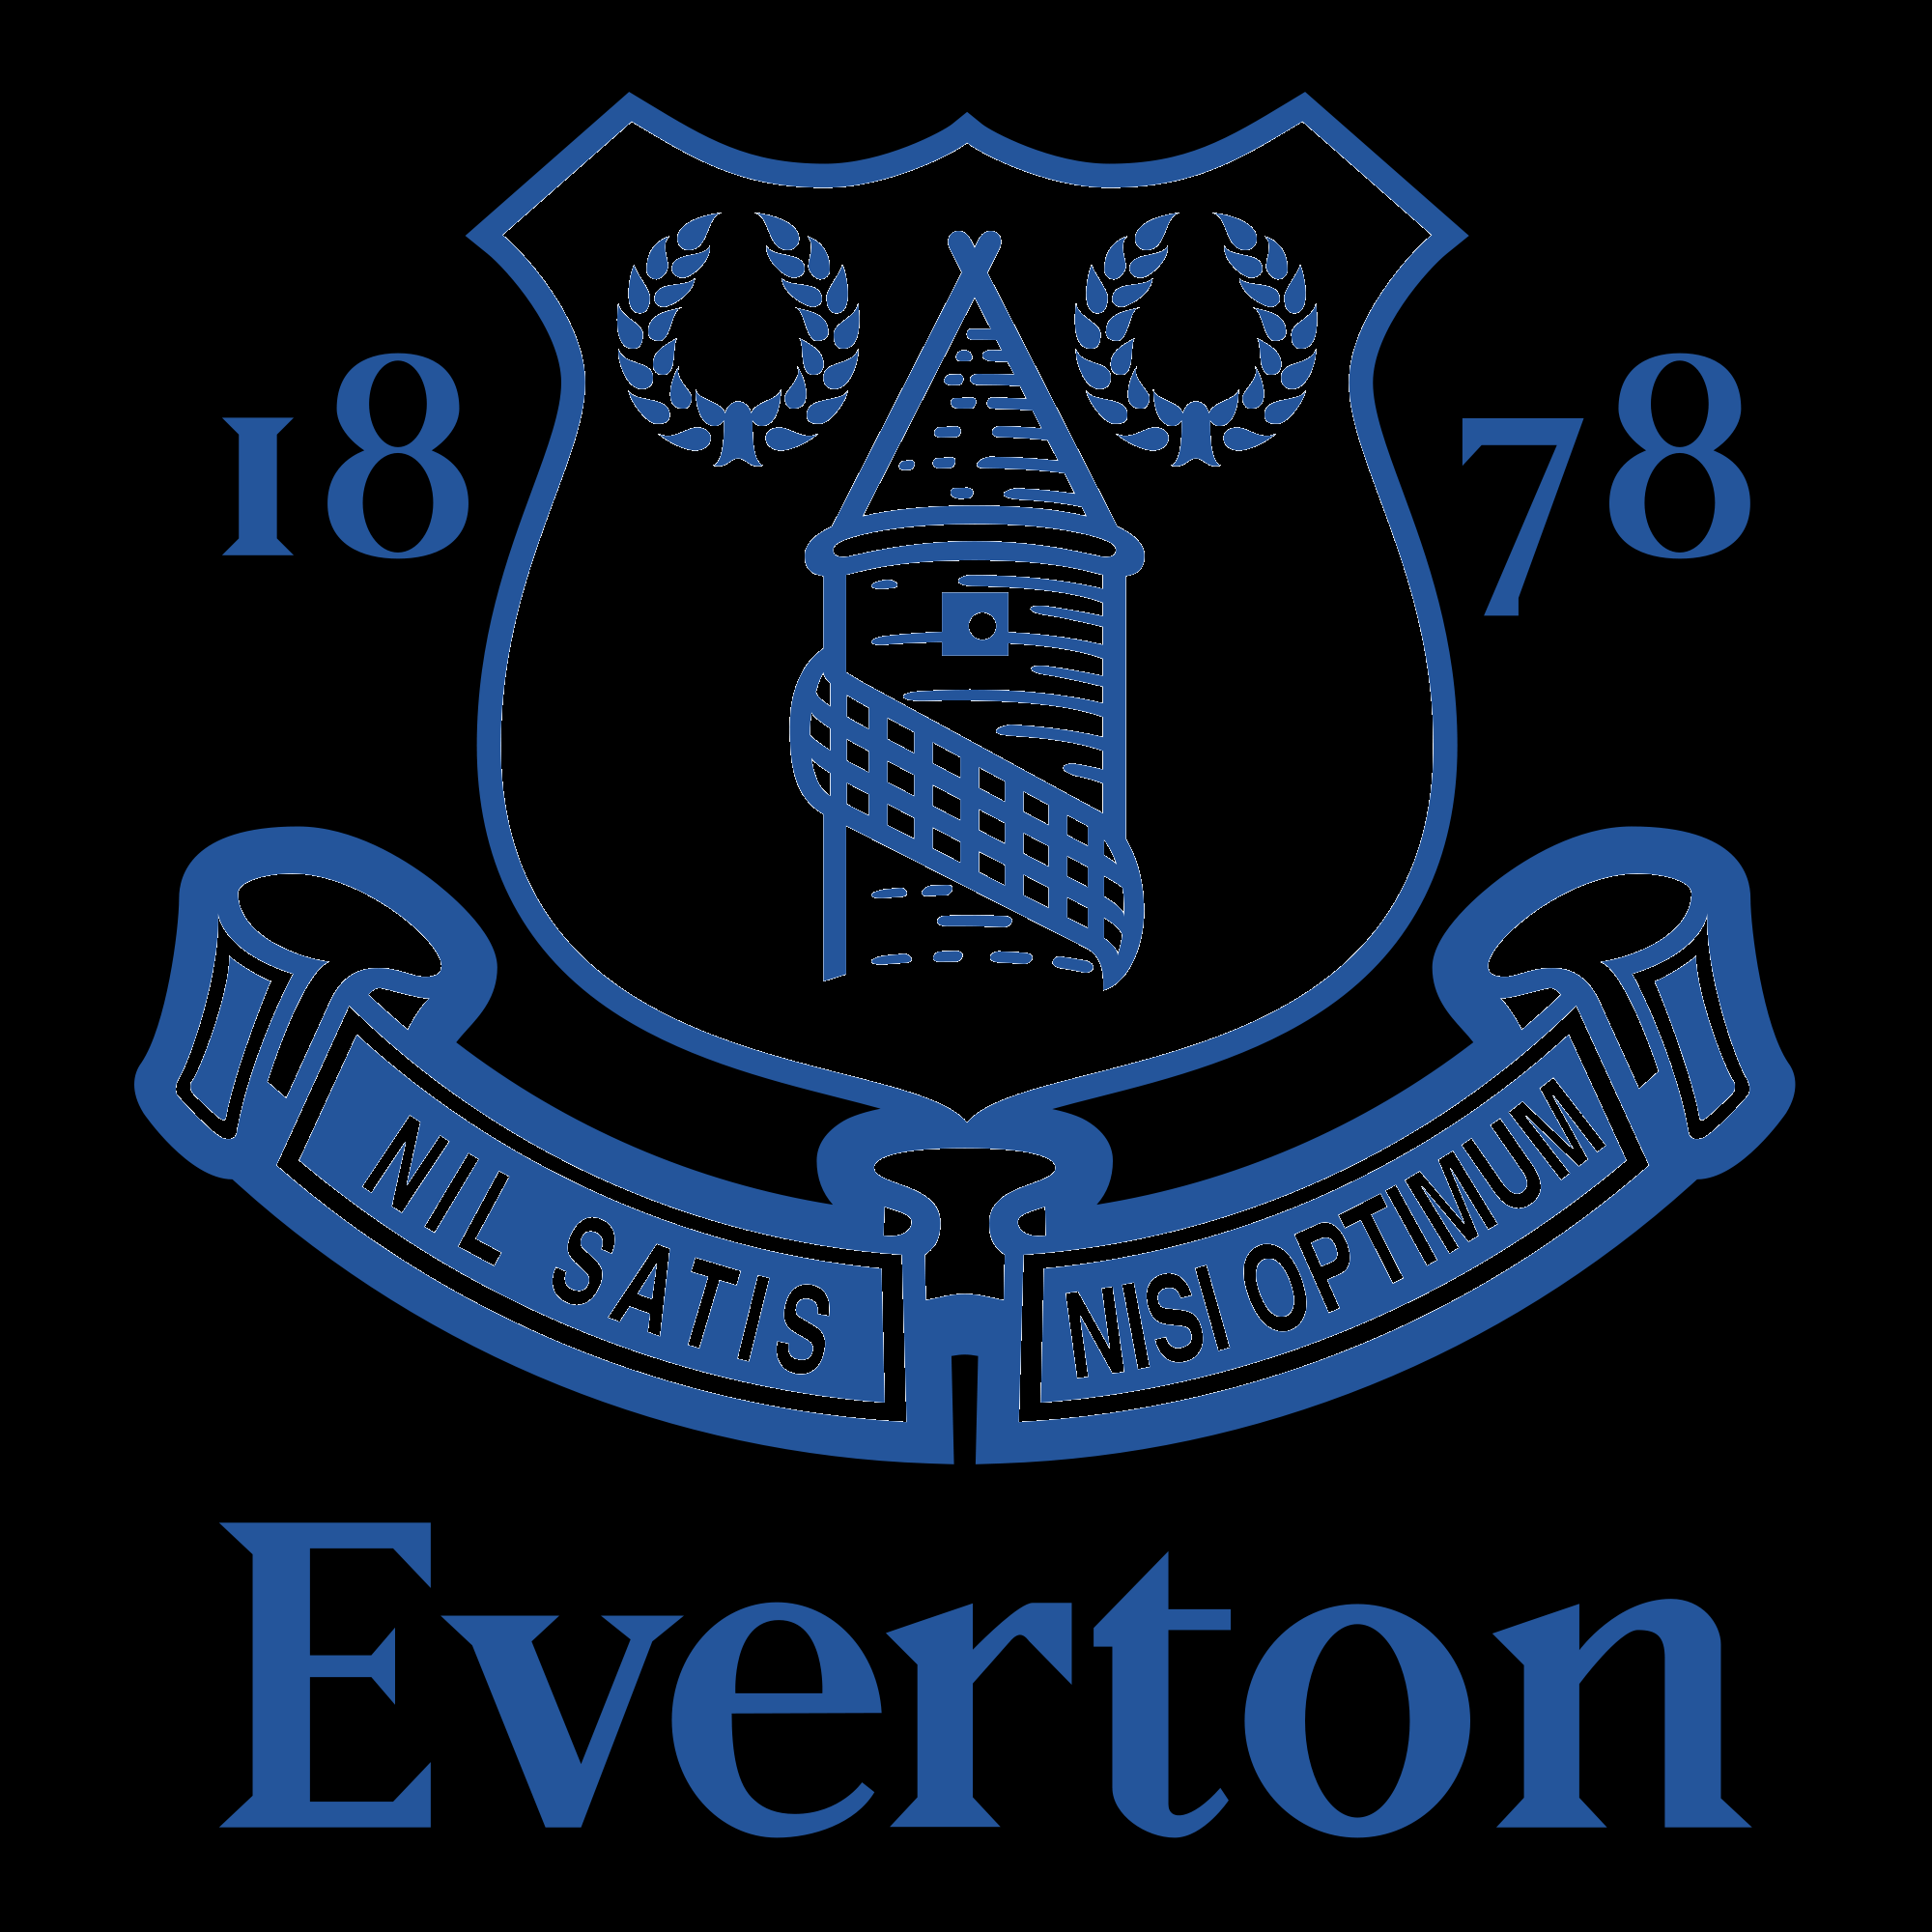 Everton FC score an own goal by revealing new club crest | down with design